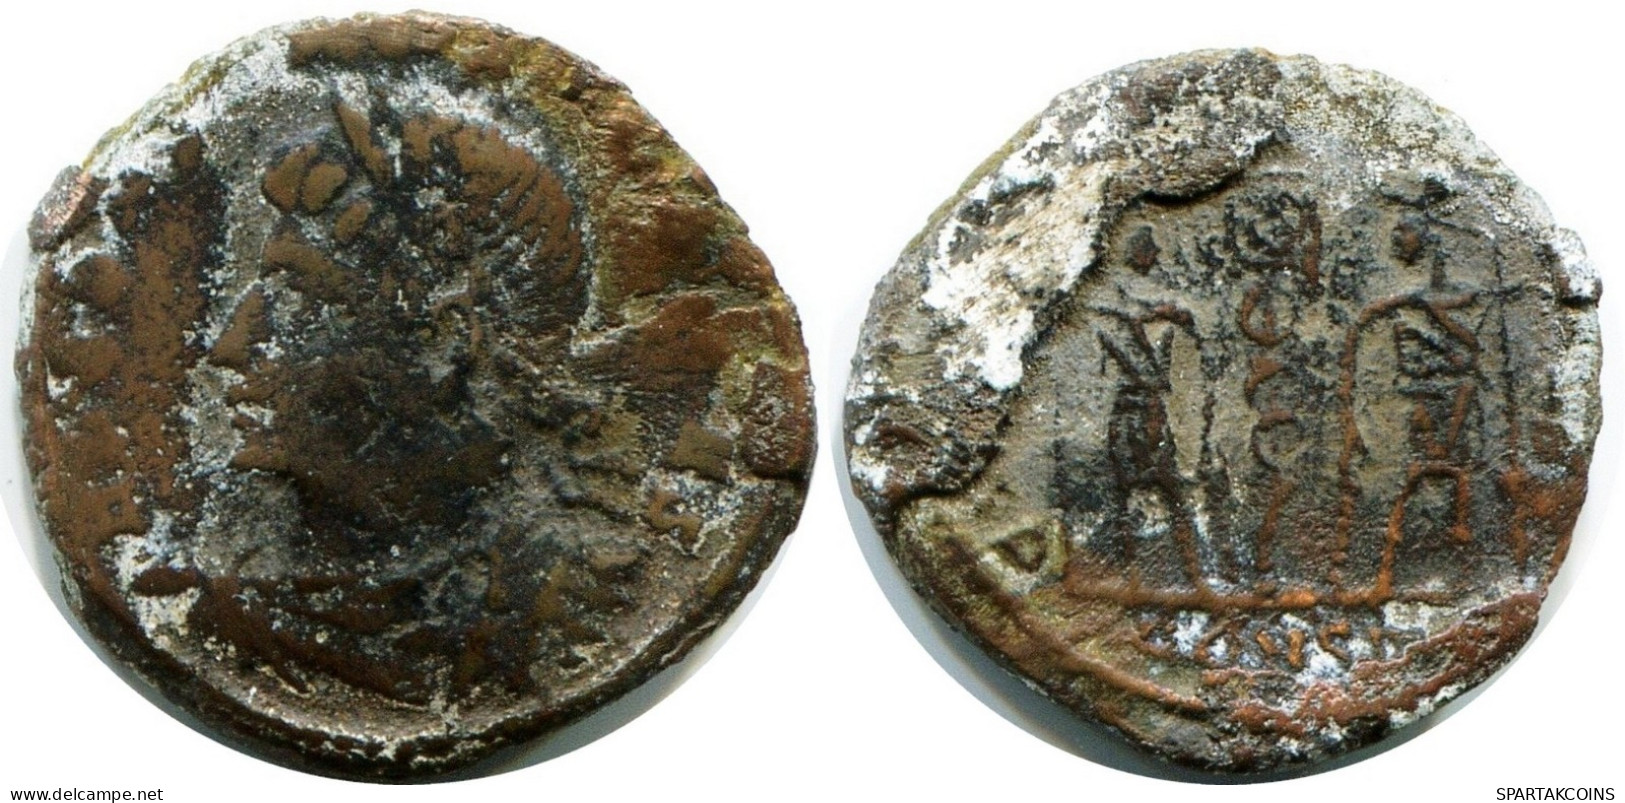 CONSTANS MINTED IN CONSTANTINOPLE FROM THE ROYAL ONTARIO MUSEUM #ANC11959.14.E.A - The Christian Empire (307 AD To 363 AD)